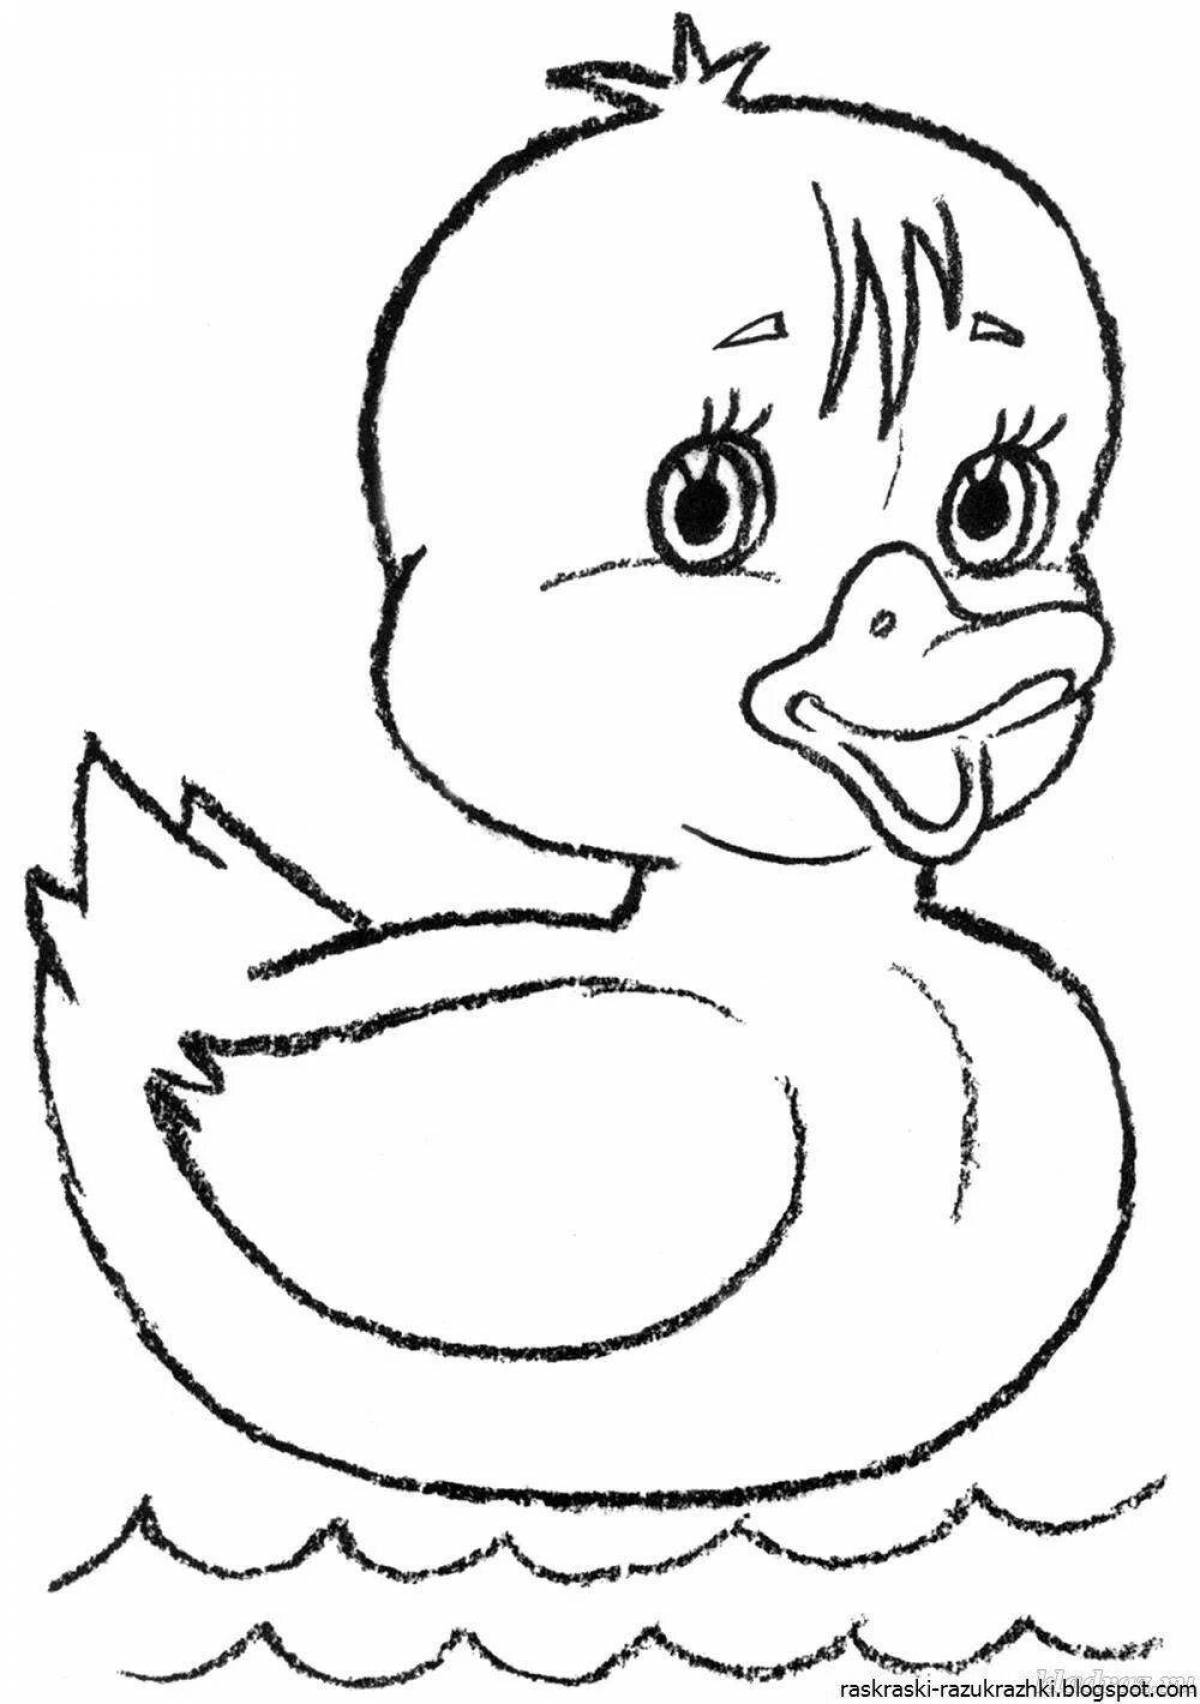 Chicken and duckling adorable coloring book